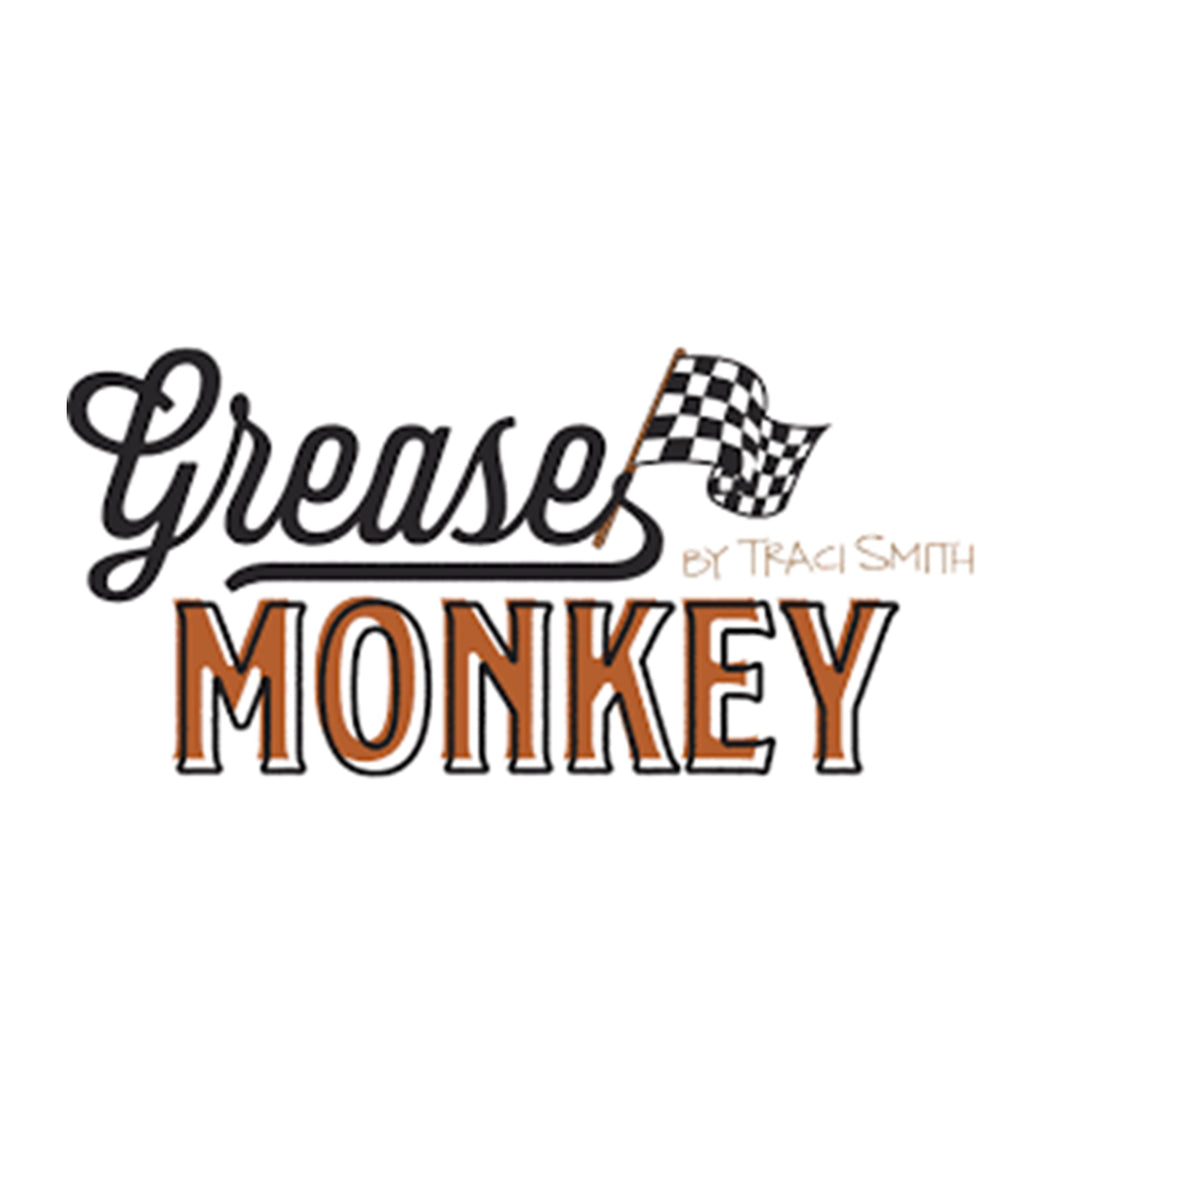 Grease Monkey by Photoplay — Papermaze